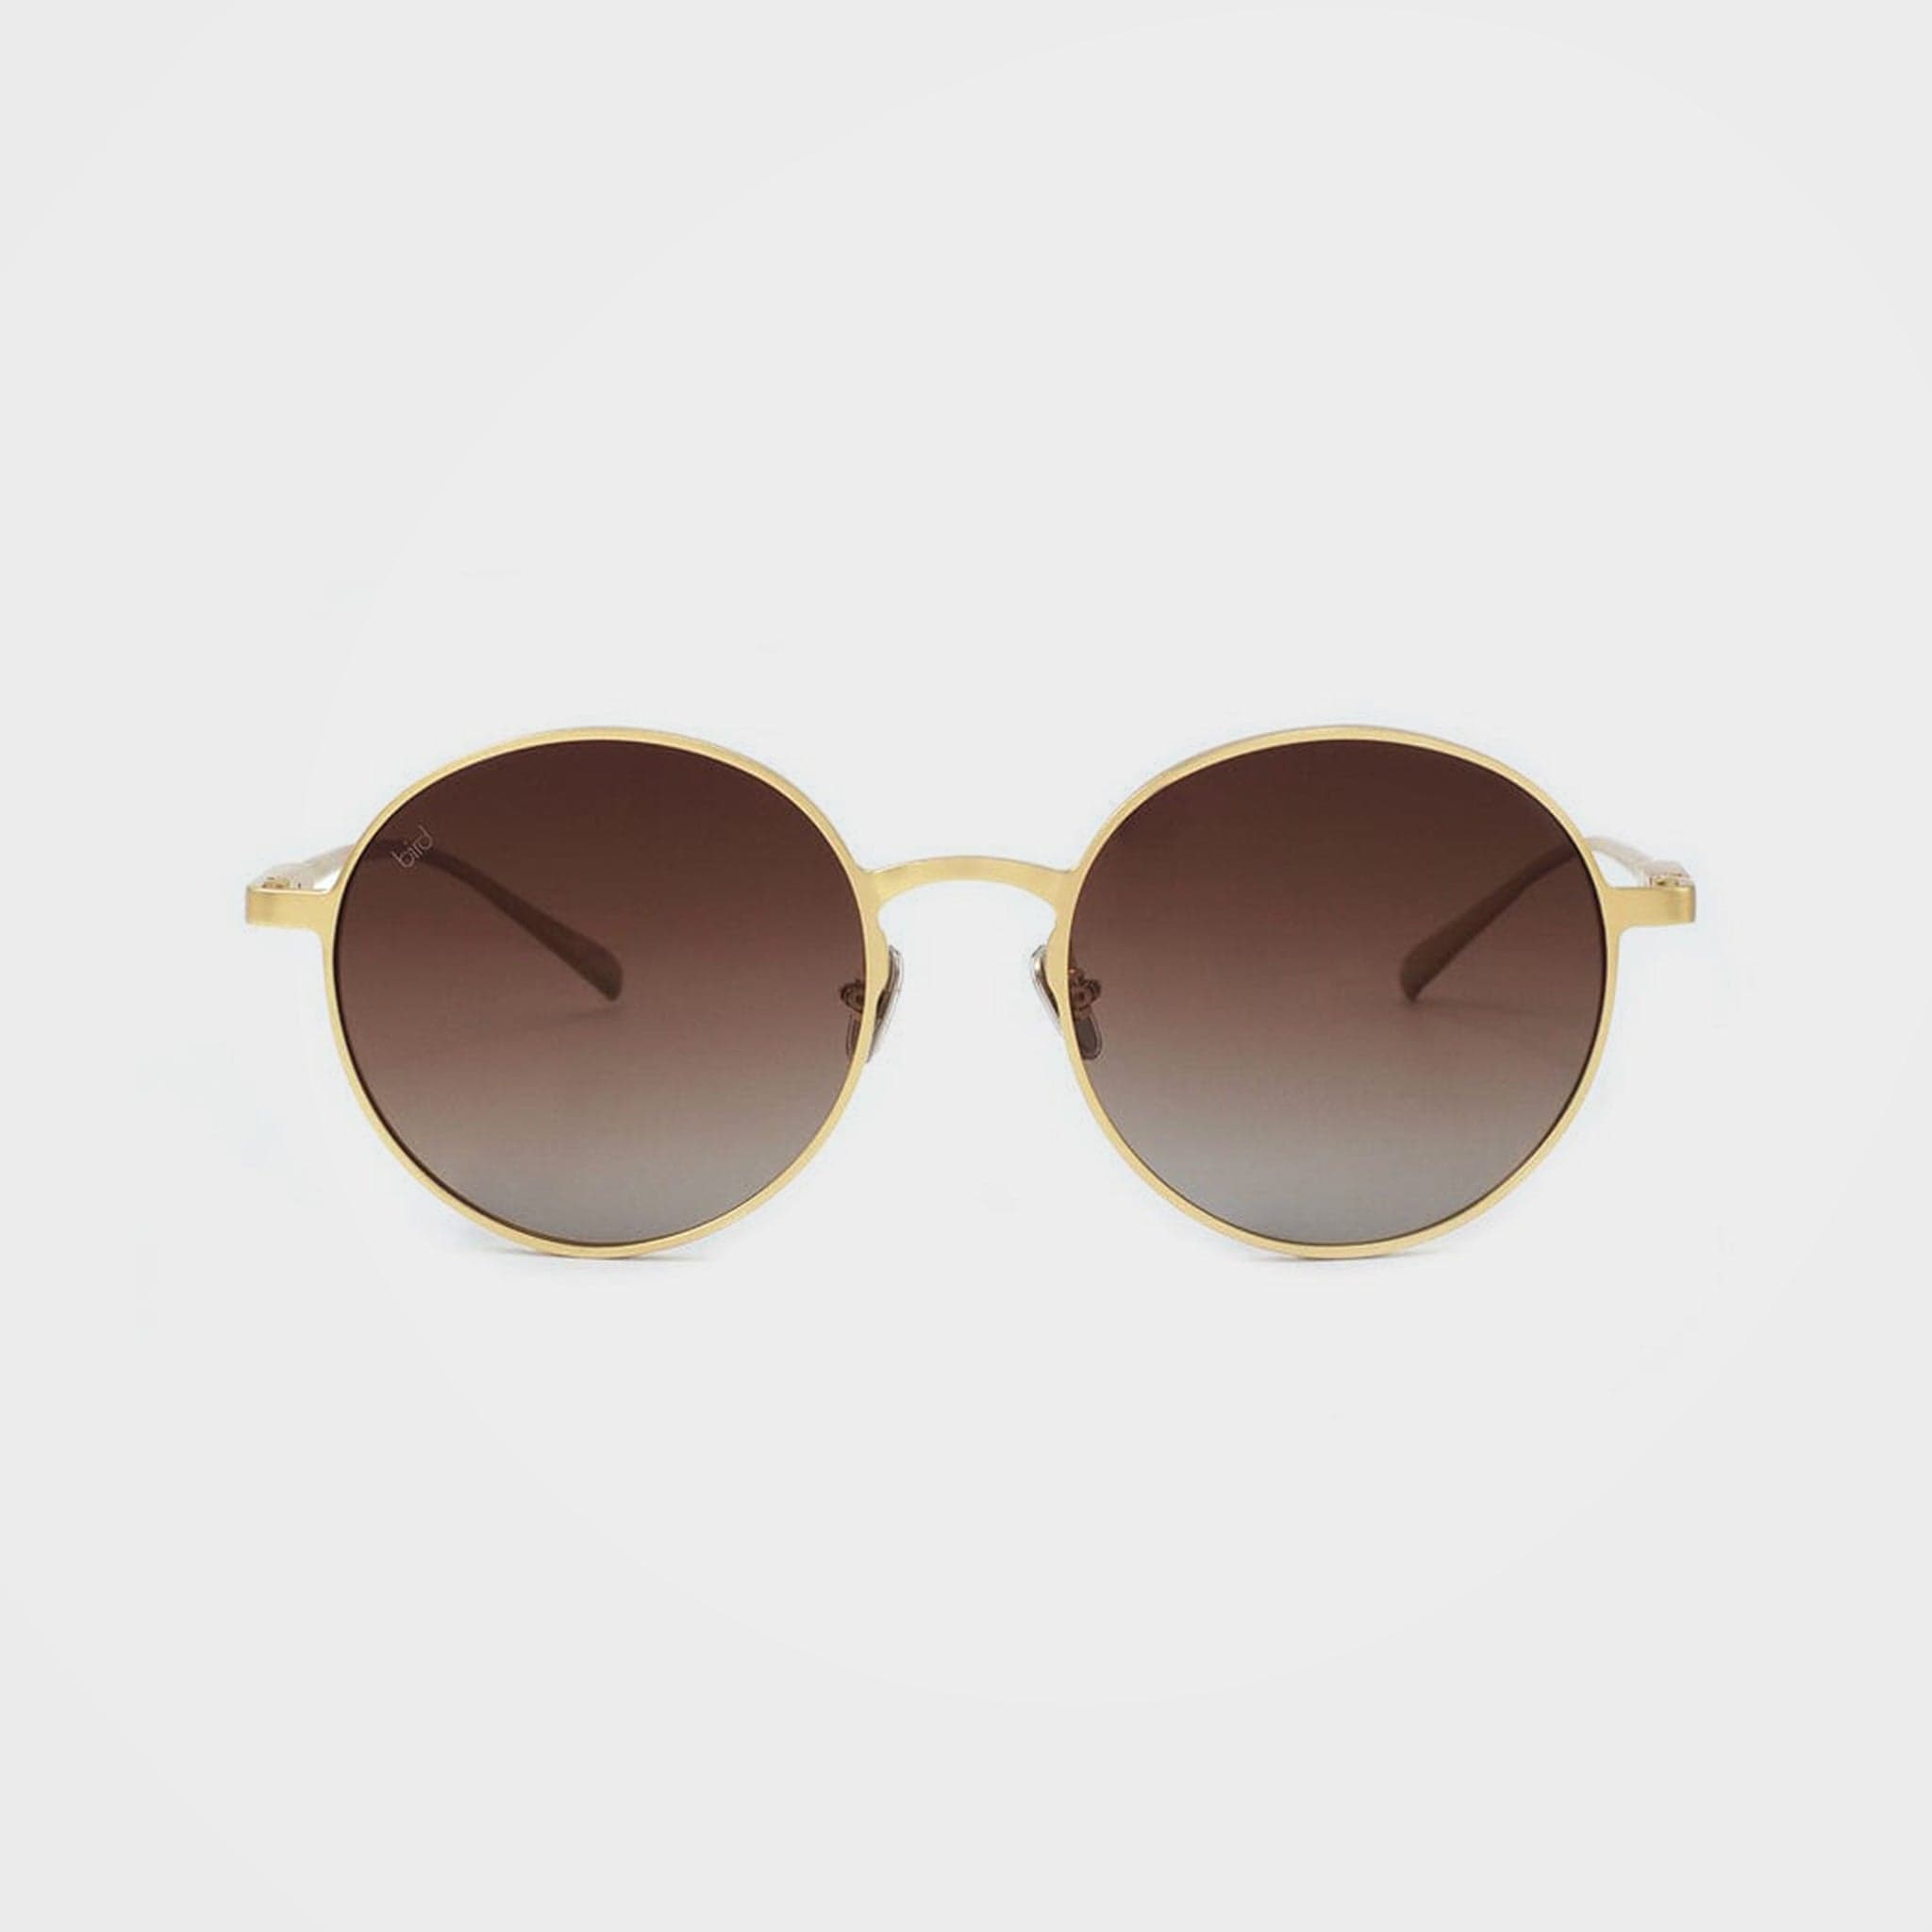 Best sunglasses for square-shaped face